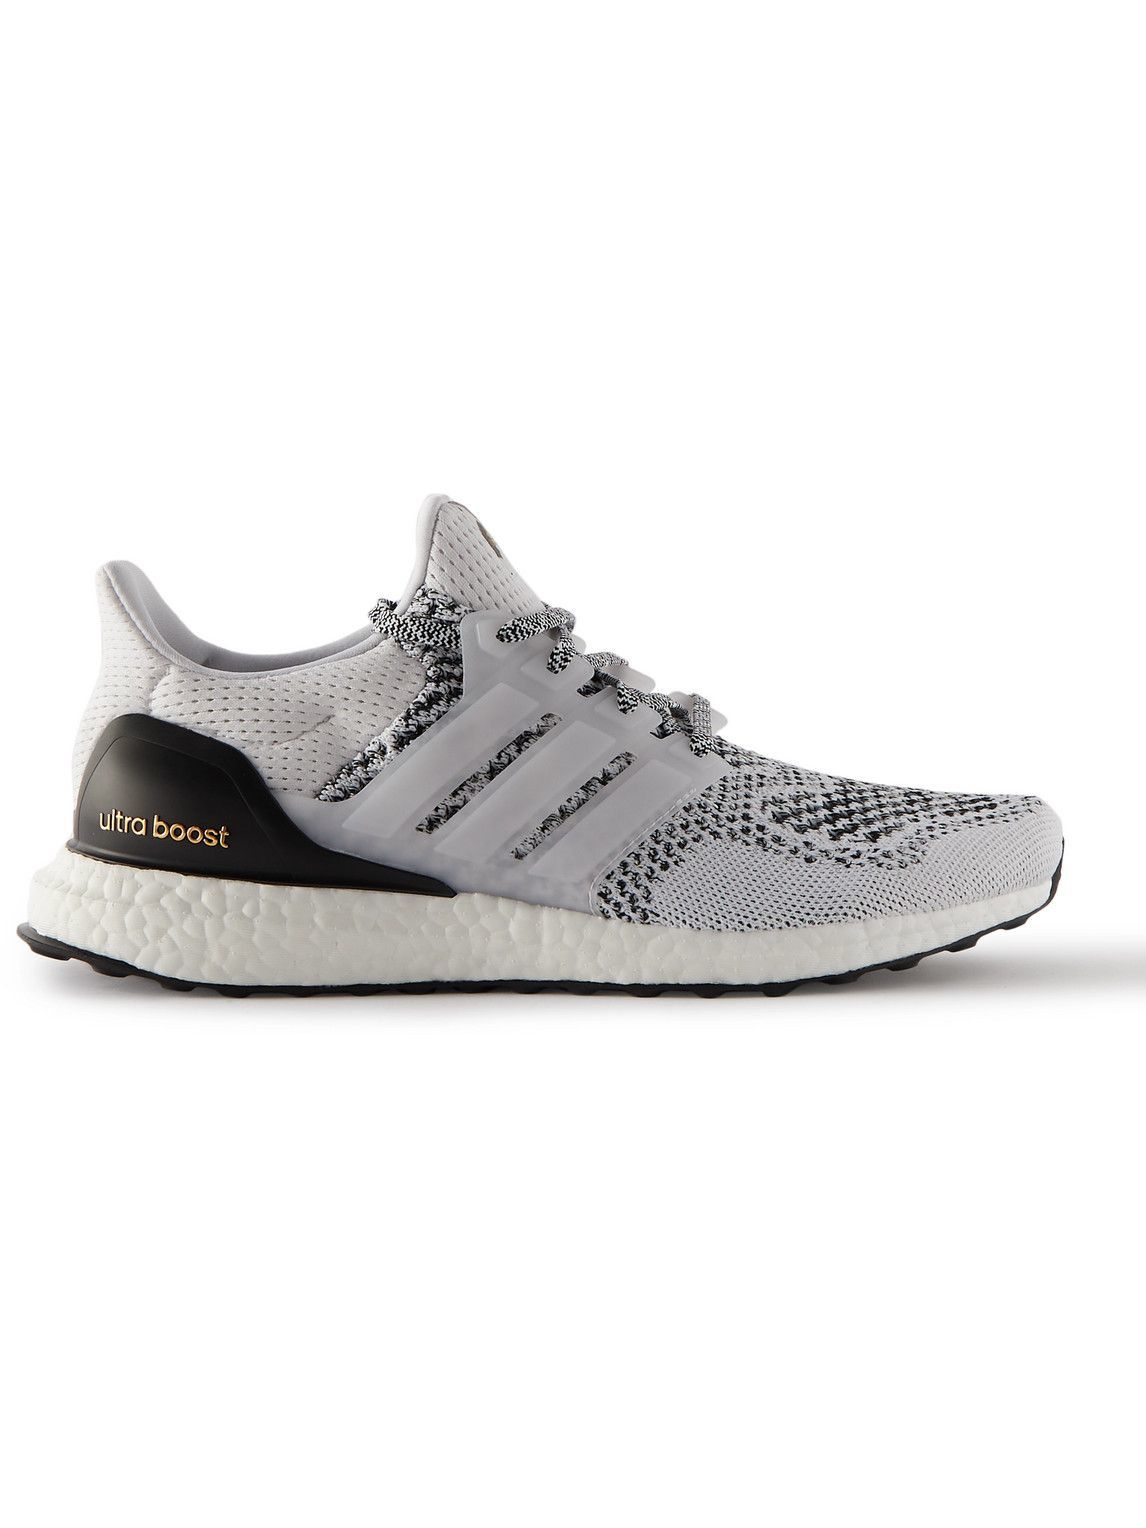 adidas Sport - Ultraboost 1.0 DNA Rubber-Trimmed Primeknit Sneakers - White